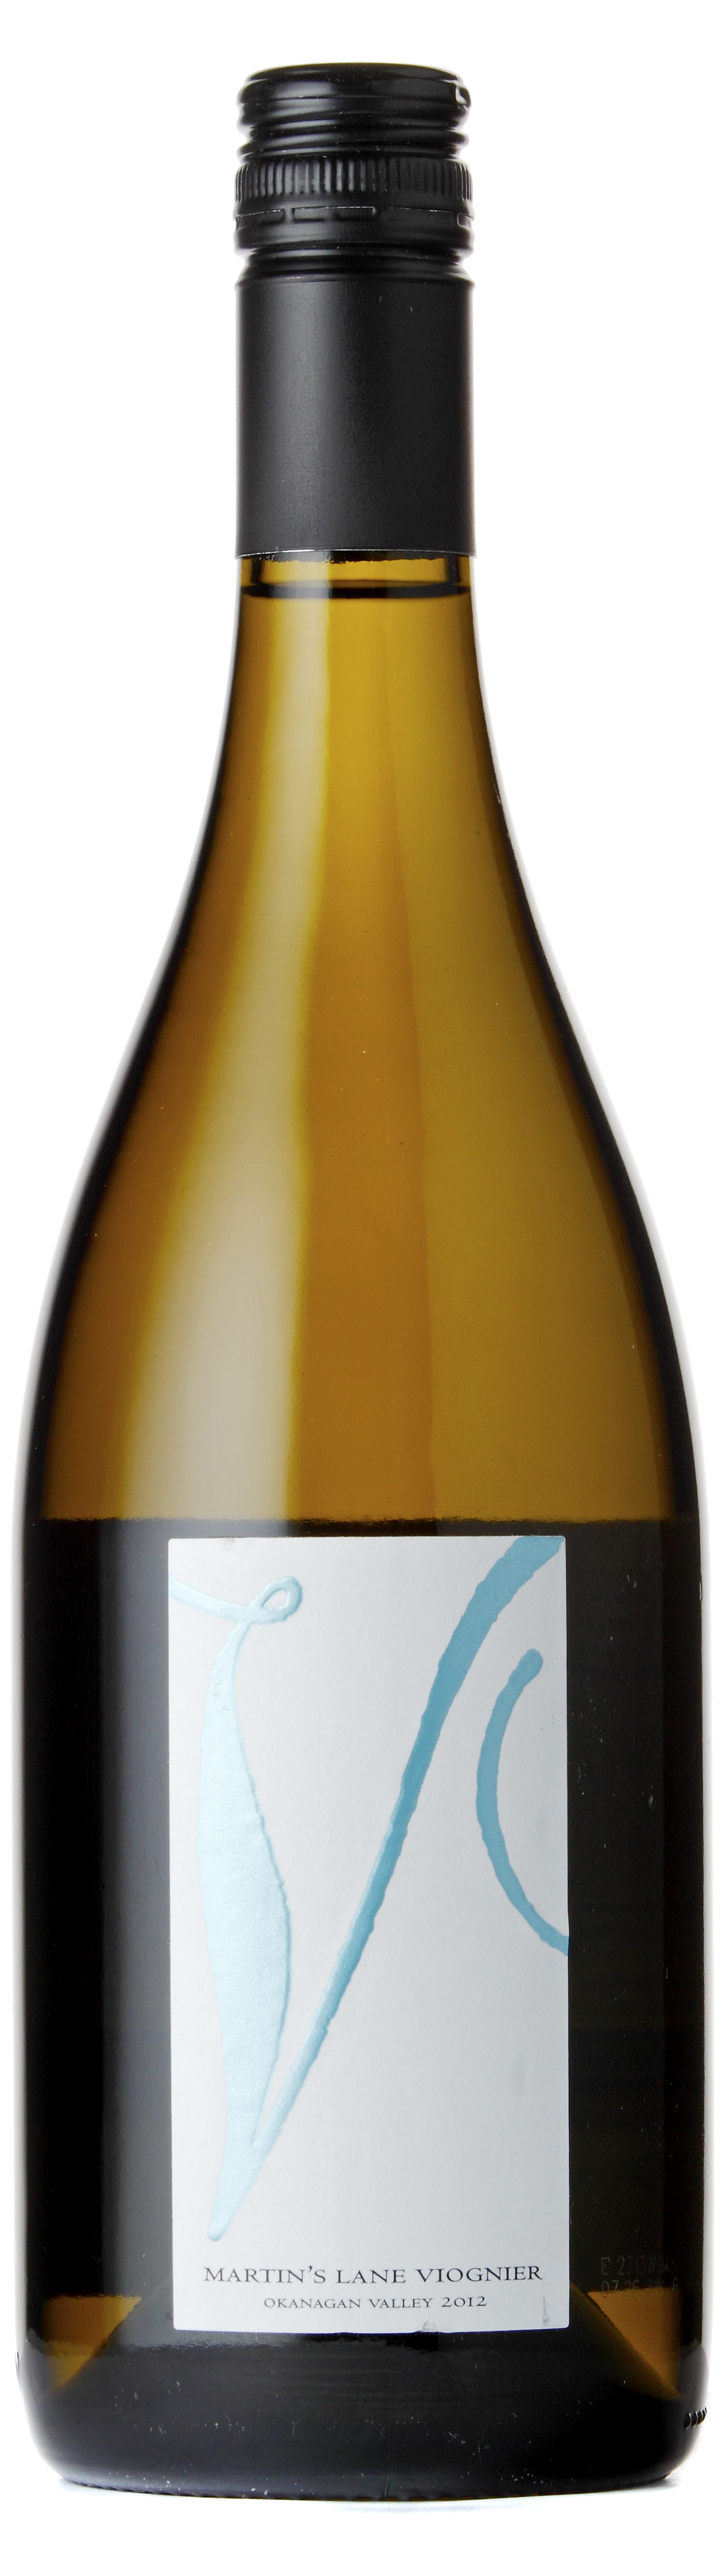 Martin's Lane Viognier 2012 - Expert wine ratings and wine reviews by WineAlign